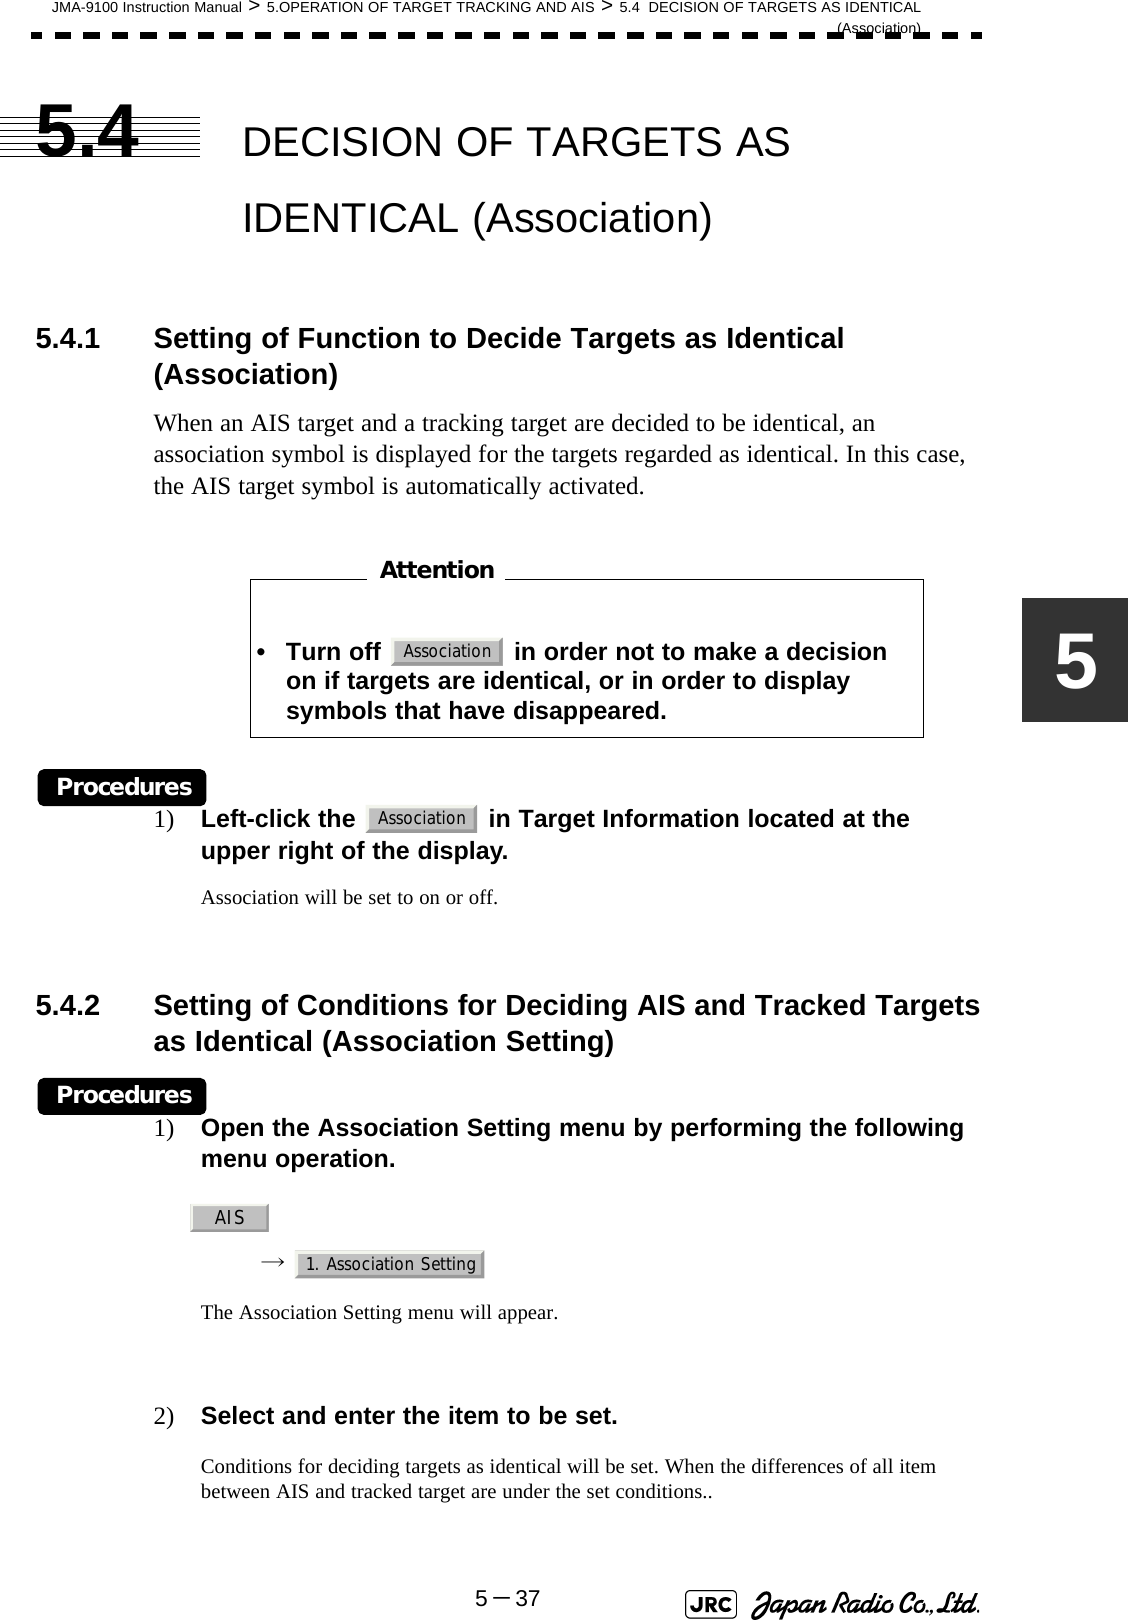 JMA-9100 Instruction Manual &gt; 5.OPERATION OF TARGET TRACKING AND AIS &gt; 5.4  DECISION OF TARGETS AS IDENTICAL(Association)5－3755.4 DECISION OF TARGETS AS IDENTICAL (Association)5.4.1 Setting of Function to Decide Targets as Identical (Association)When an AIS target and a tracking target are decided to be identical, an association symbol is displayed for the targets regarded as identical. In this case, the AIS target symbol is automatically activated.　　　　　　　　Procedures1) Left-click the   in Target Information located at the upper right of the display.Association will be set to on or off.5.4.2 Setting of Conditions for Deciding AIS and Tracked Targetsas Identical (Association Setting)Procedures1) Open the Association Setting menu by performing the following menu operation.→ The Association Setting menu will appear.2) Select and enter the item to be set.Conditions for deciding targets as identical will be set. When the differences of all item between AIS and tracked target are under the set conditions..• Turn off   in order not to make a decision on if targets are identical, or in order to display symbols that have disappeared.AttentionAssociationAssociationAIS1. Association Setting